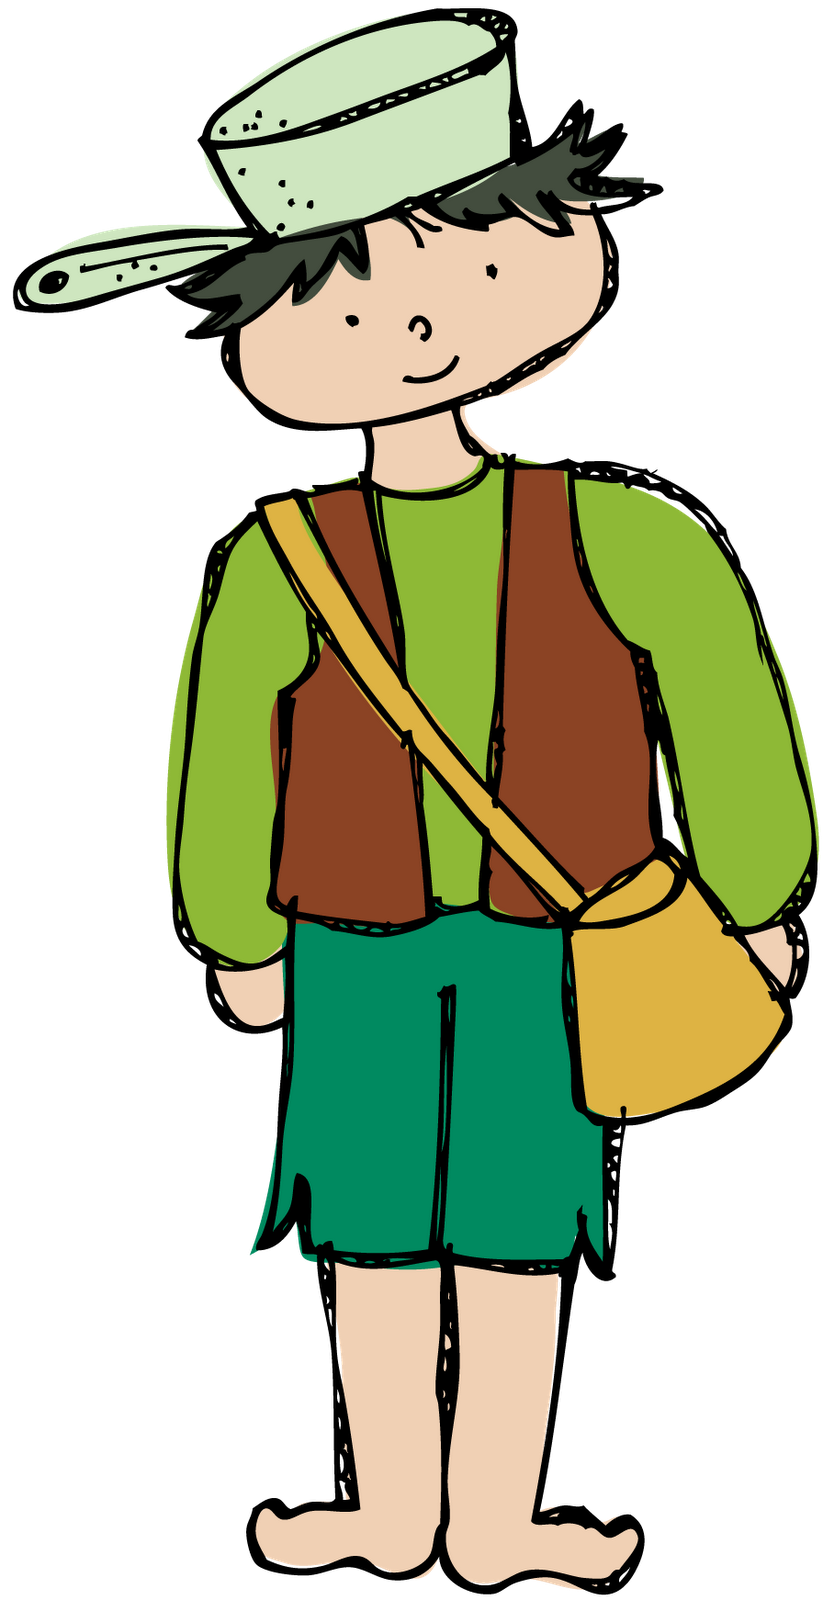 Animated Beggar PNG HD Quality